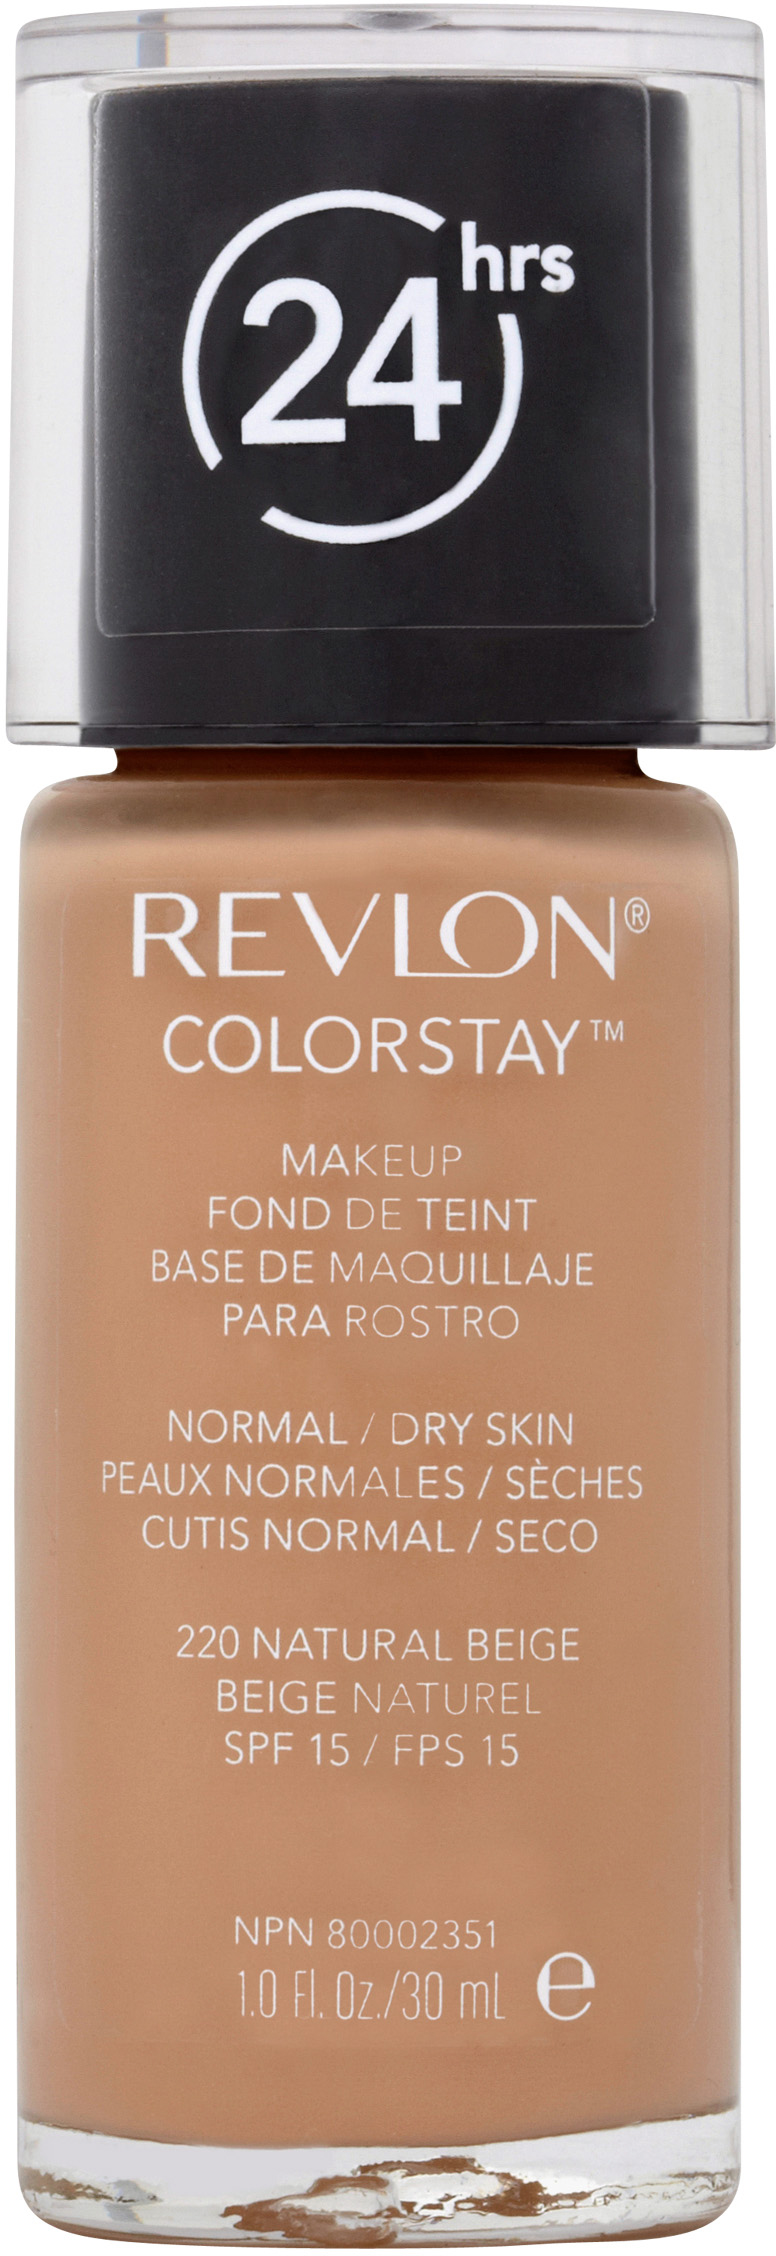 Revlon Cosmetics Colorstay Foundation Normal/Dry Skin 220 Natural Beige